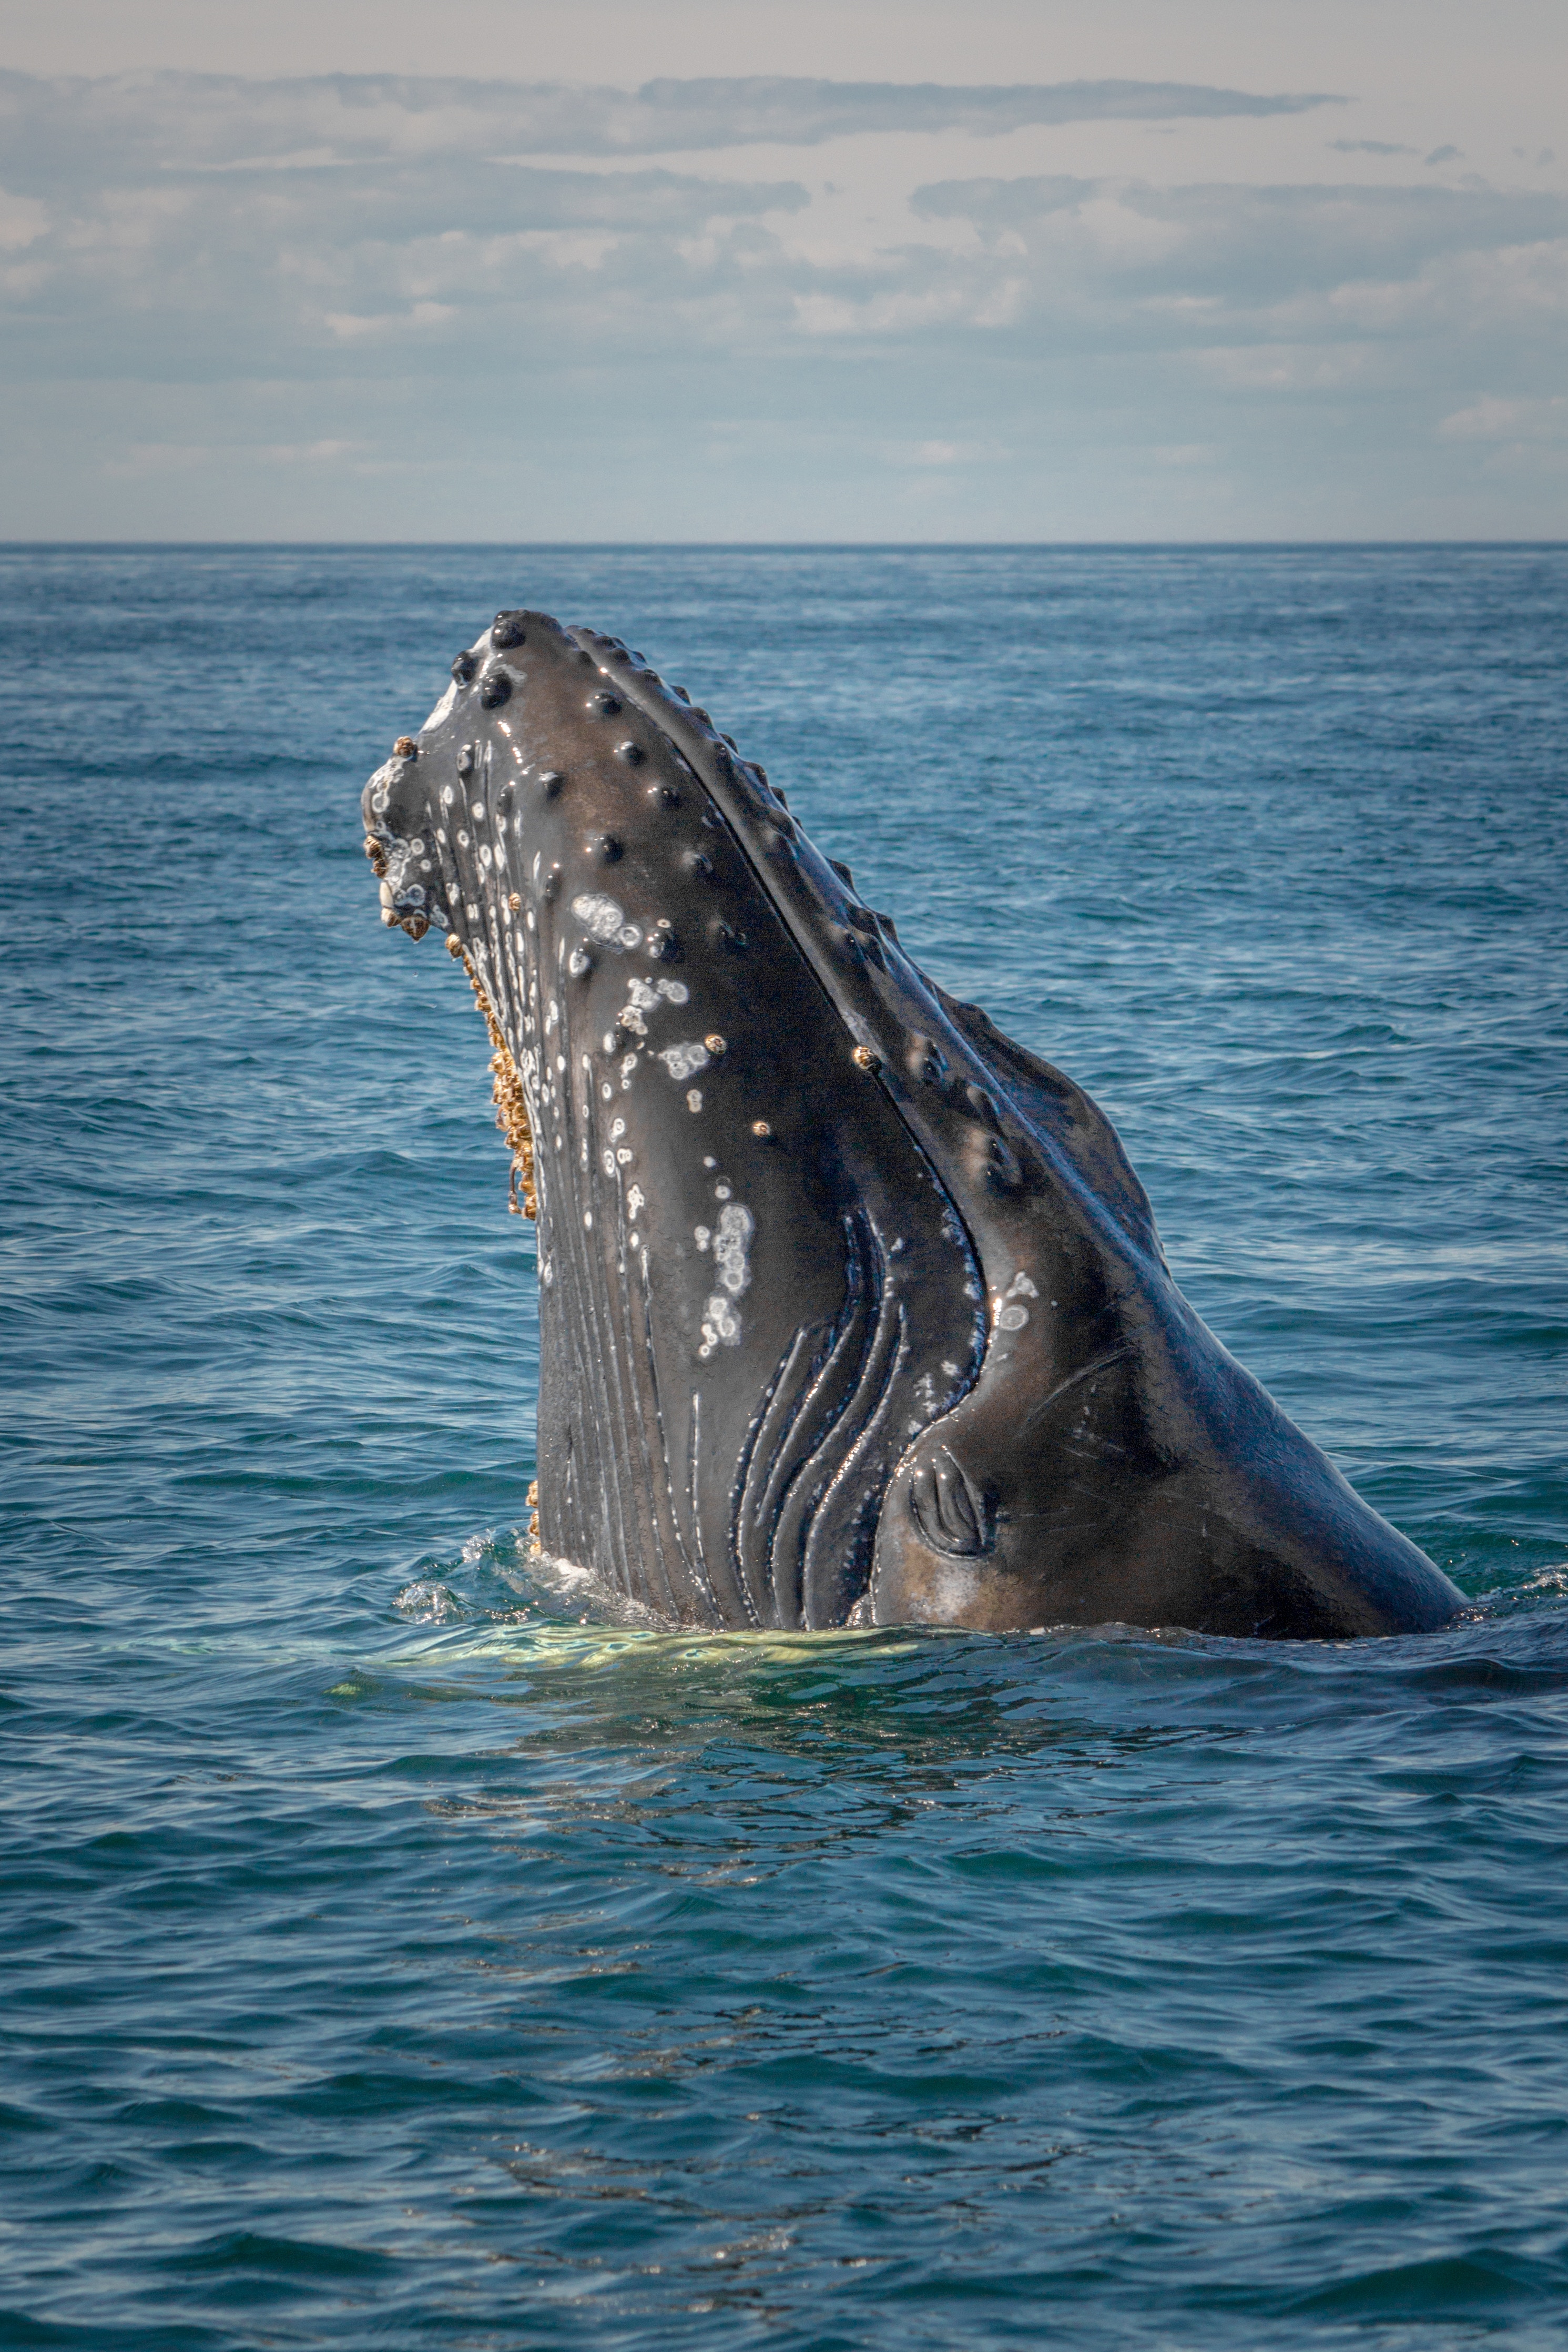 A close up photo of a sperm whale emerging from the water.